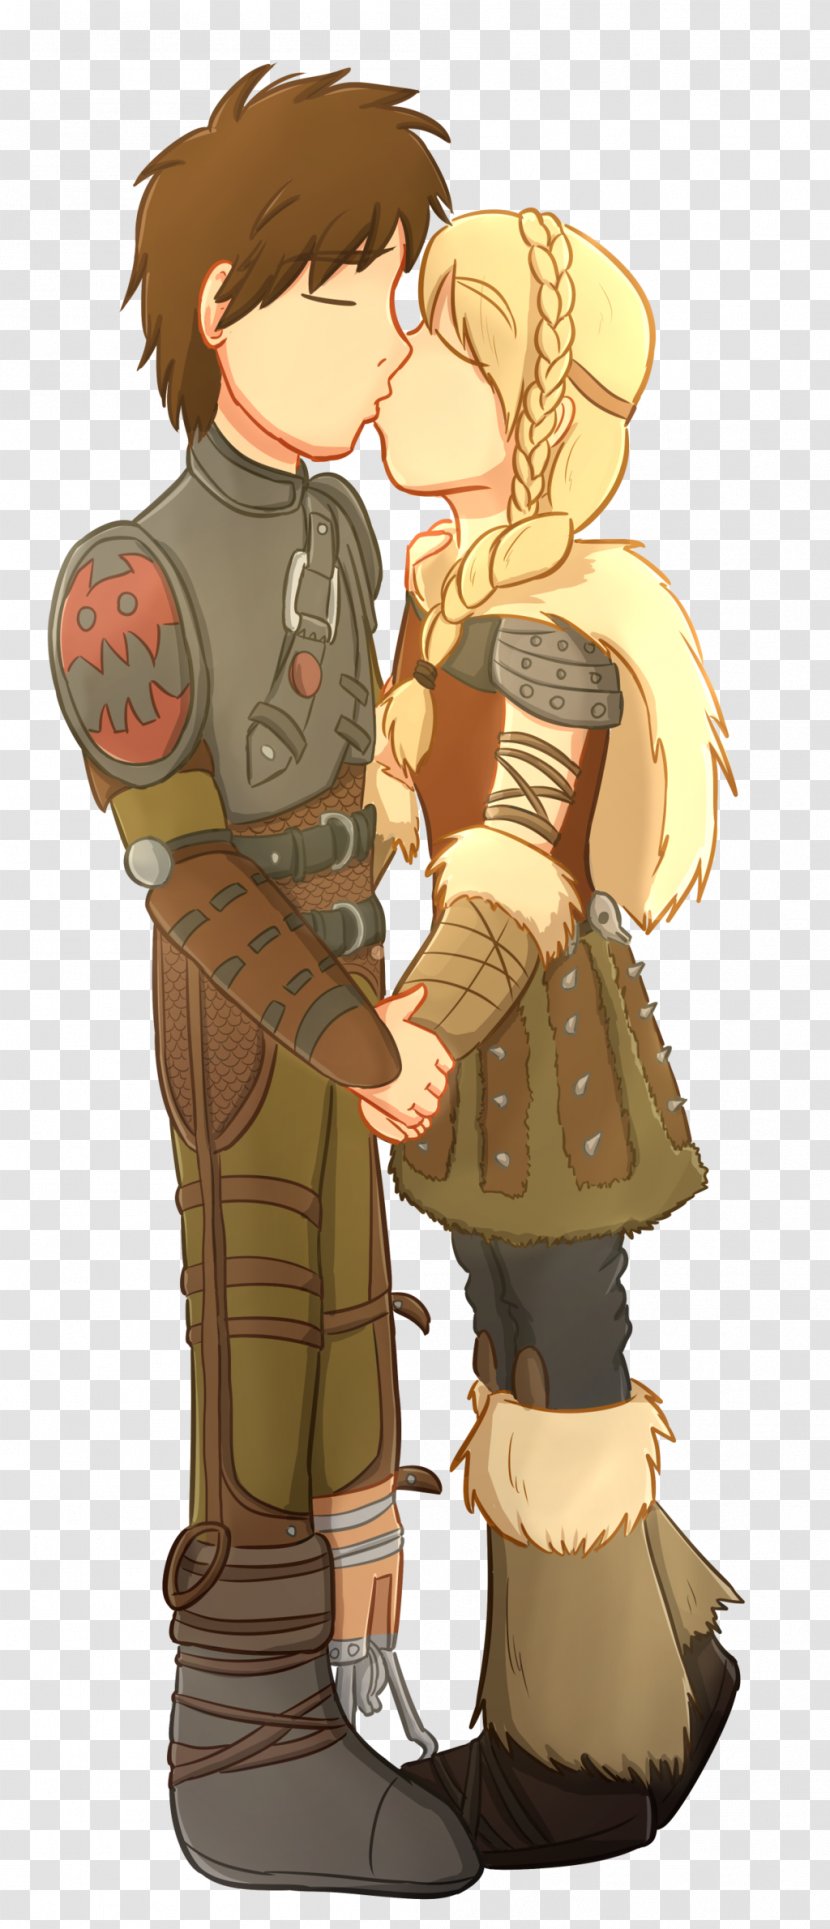 Hiccup Horrendous Haddock III Astrid Ruffnut How To Train Your Dragon DeviantArt - Heart Transparent PNG